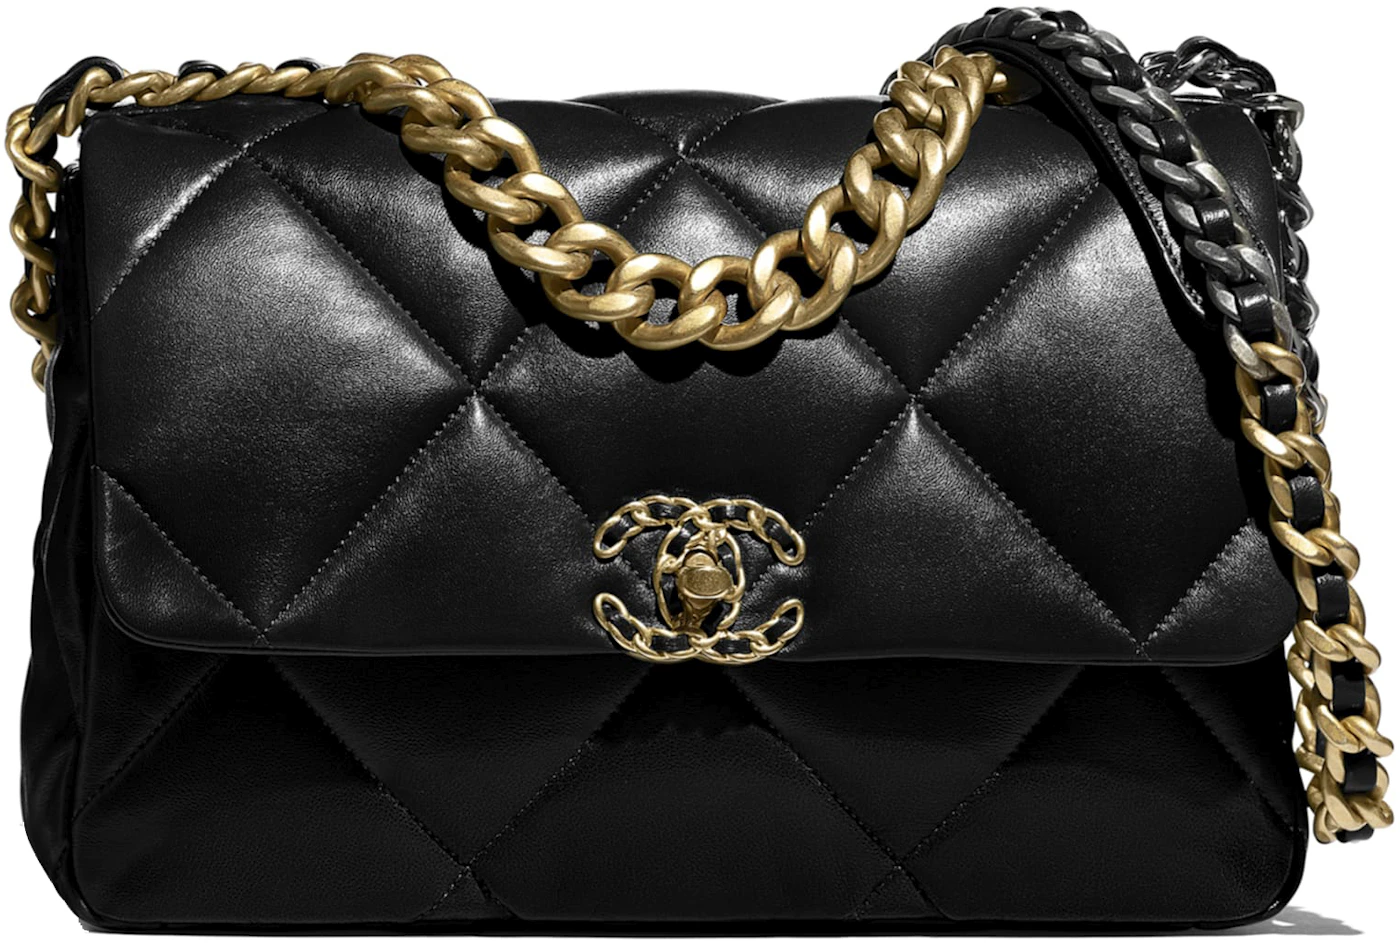 CHANEL Lambskin Quilted Large Chanel 19 Flap Black 524694